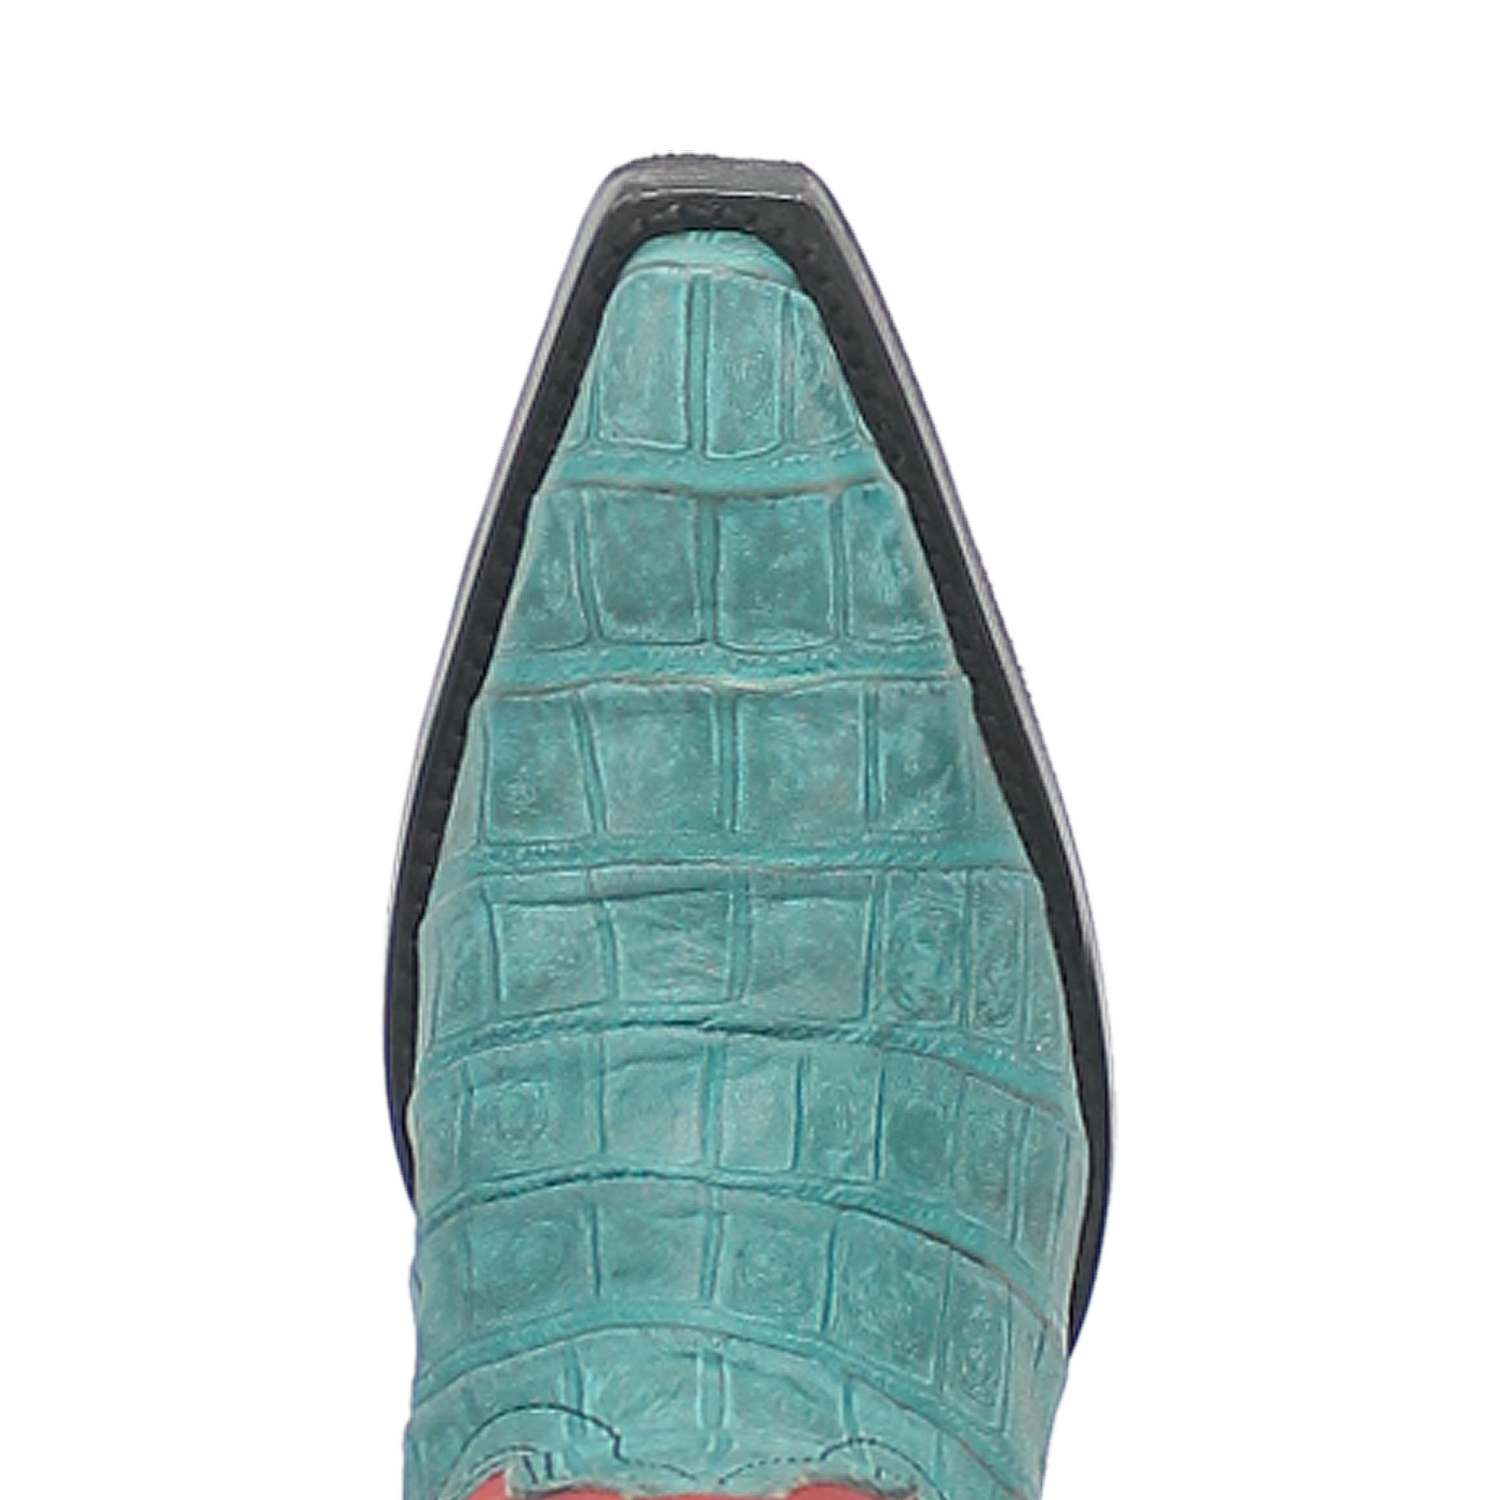 Online Exclusive | Dingo | Matilda Leather Boot in Turquoise and Red **PREORDER